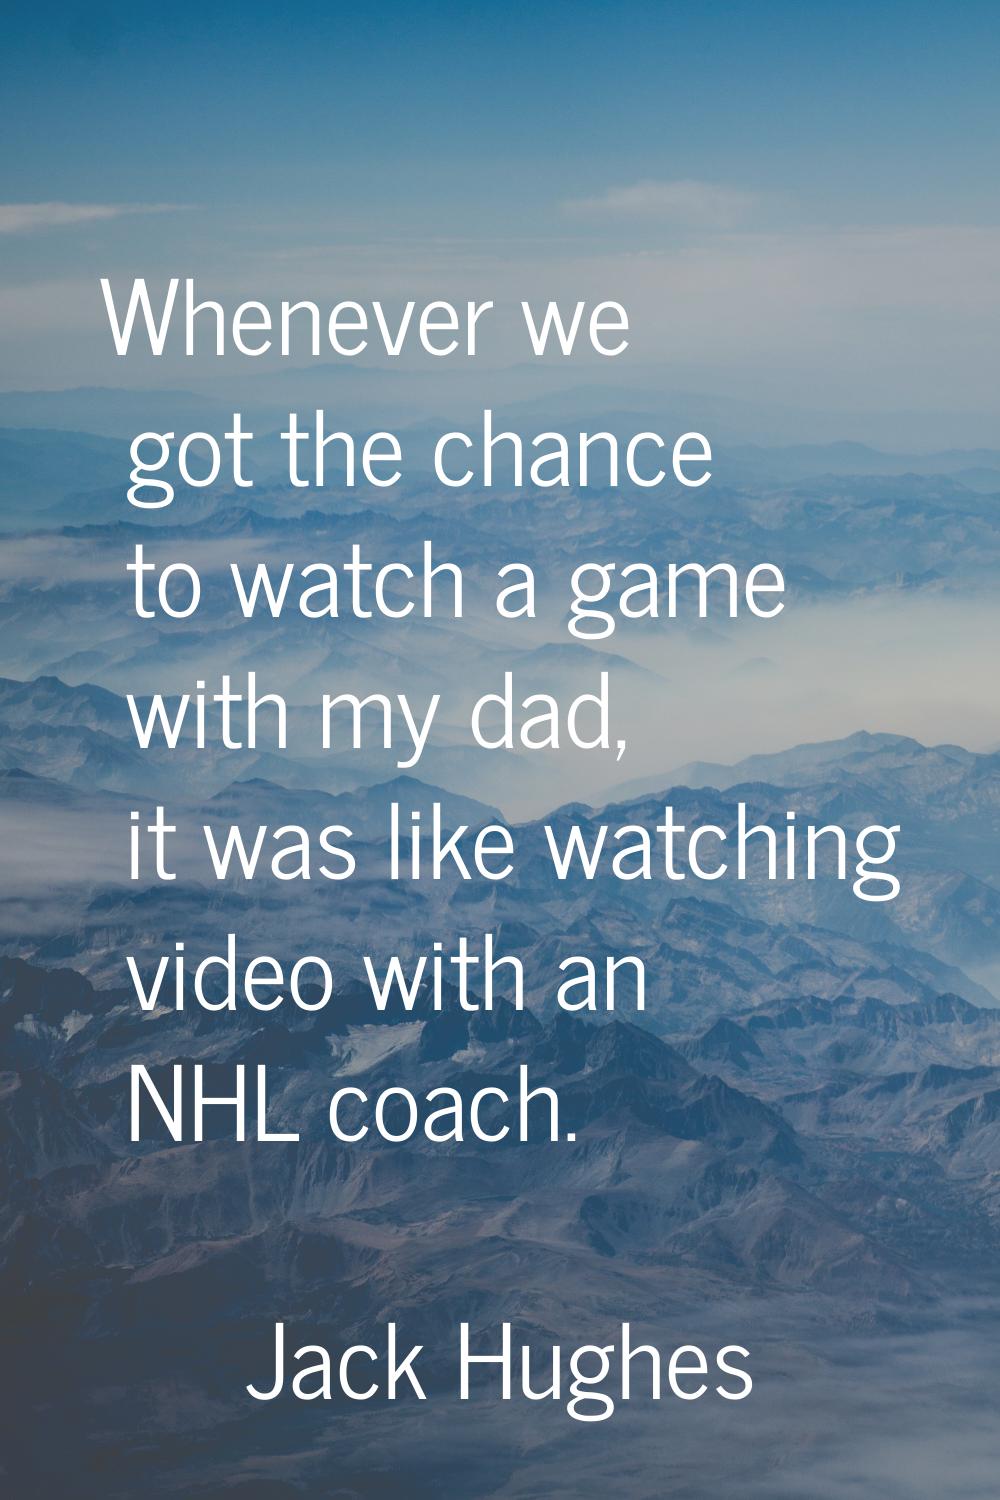 Whenever we got the chance to watch a game with my dad, it was like watching video with an NHL coac